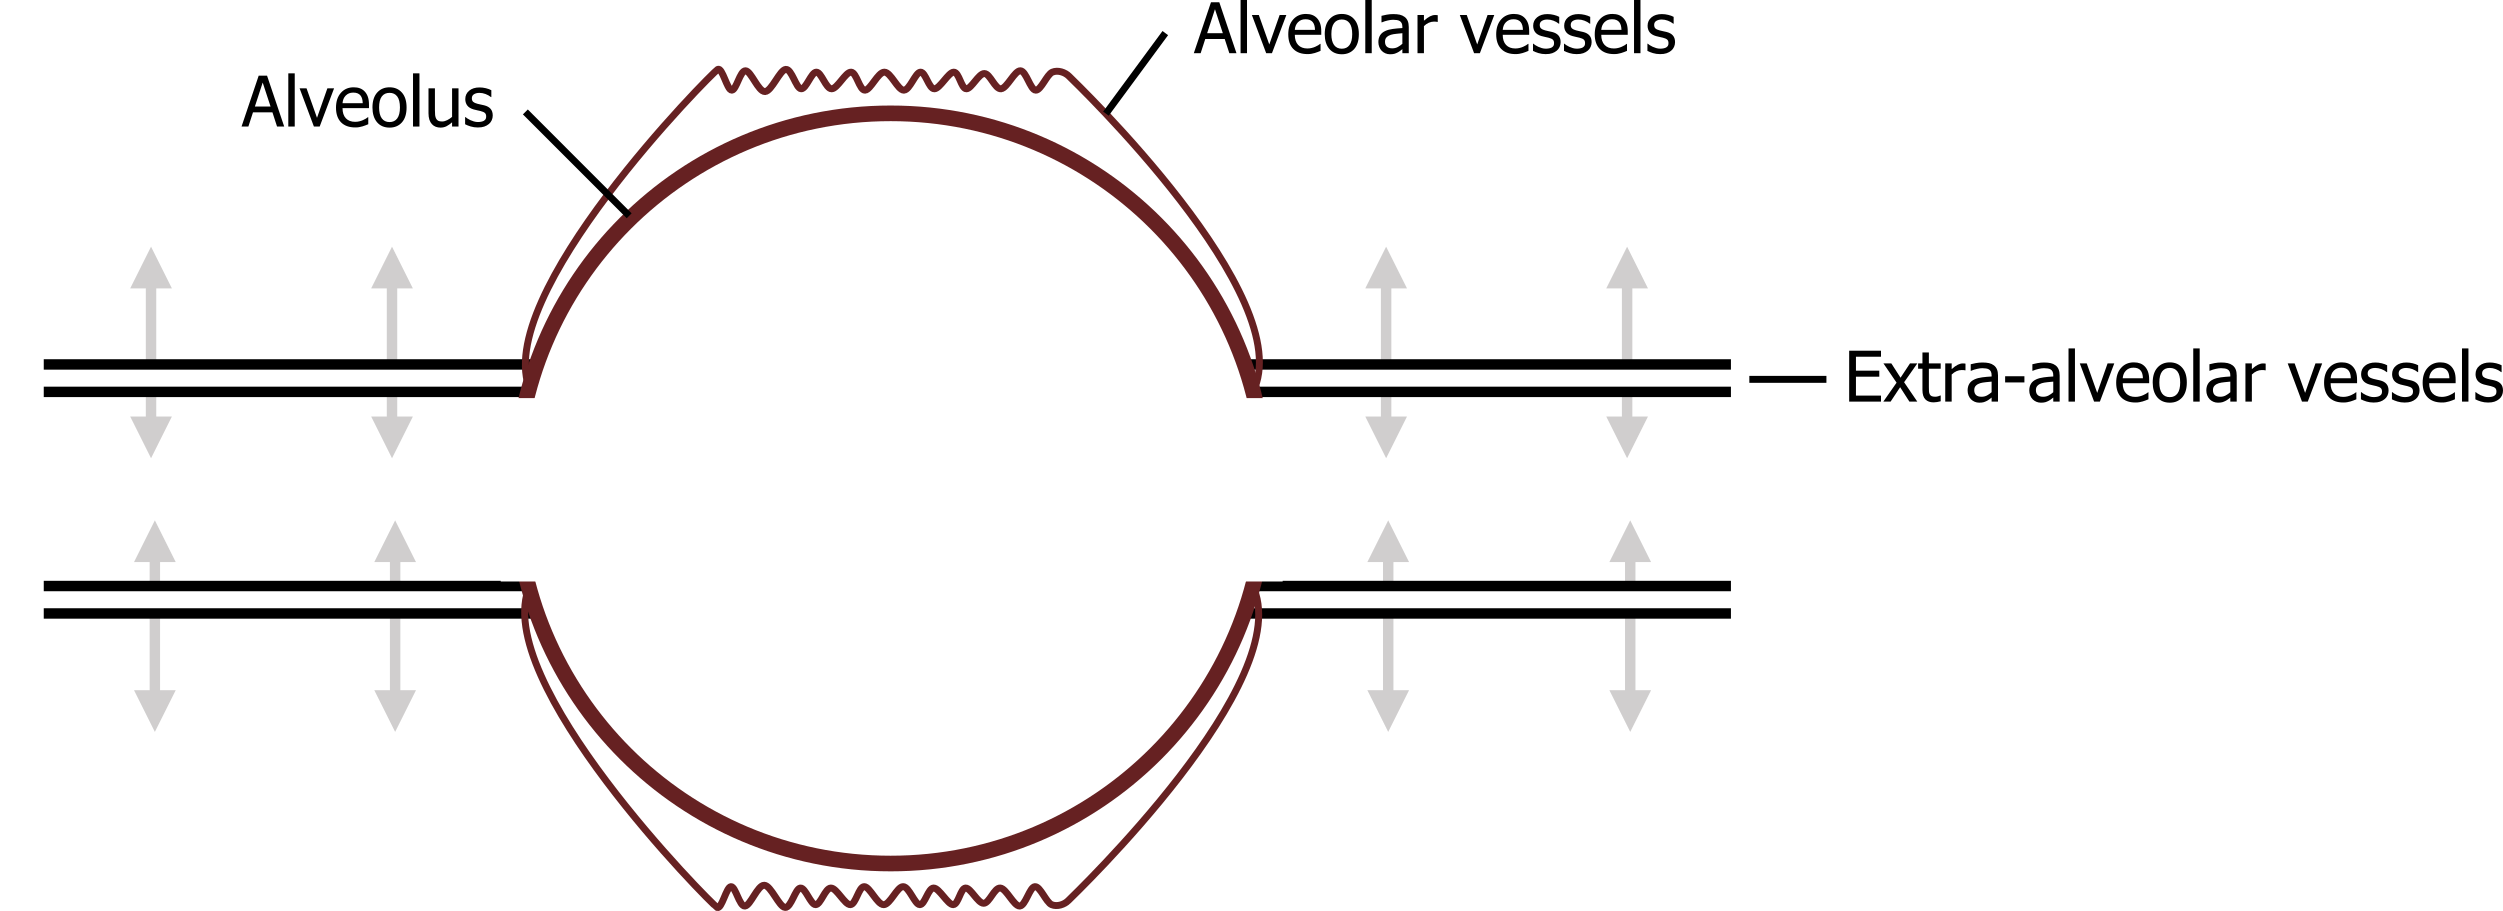 2 thin rectangles connected by a half circle in the middle. A Squiggly line is above the half circle in the same shape. The squiggly line is labeled alveolar vessels, the half circle is labeled alveolus, and the inside of the right rectangle is labeled extra-alveolar vessels. There is a mirror image of the figure without labels beneath it.